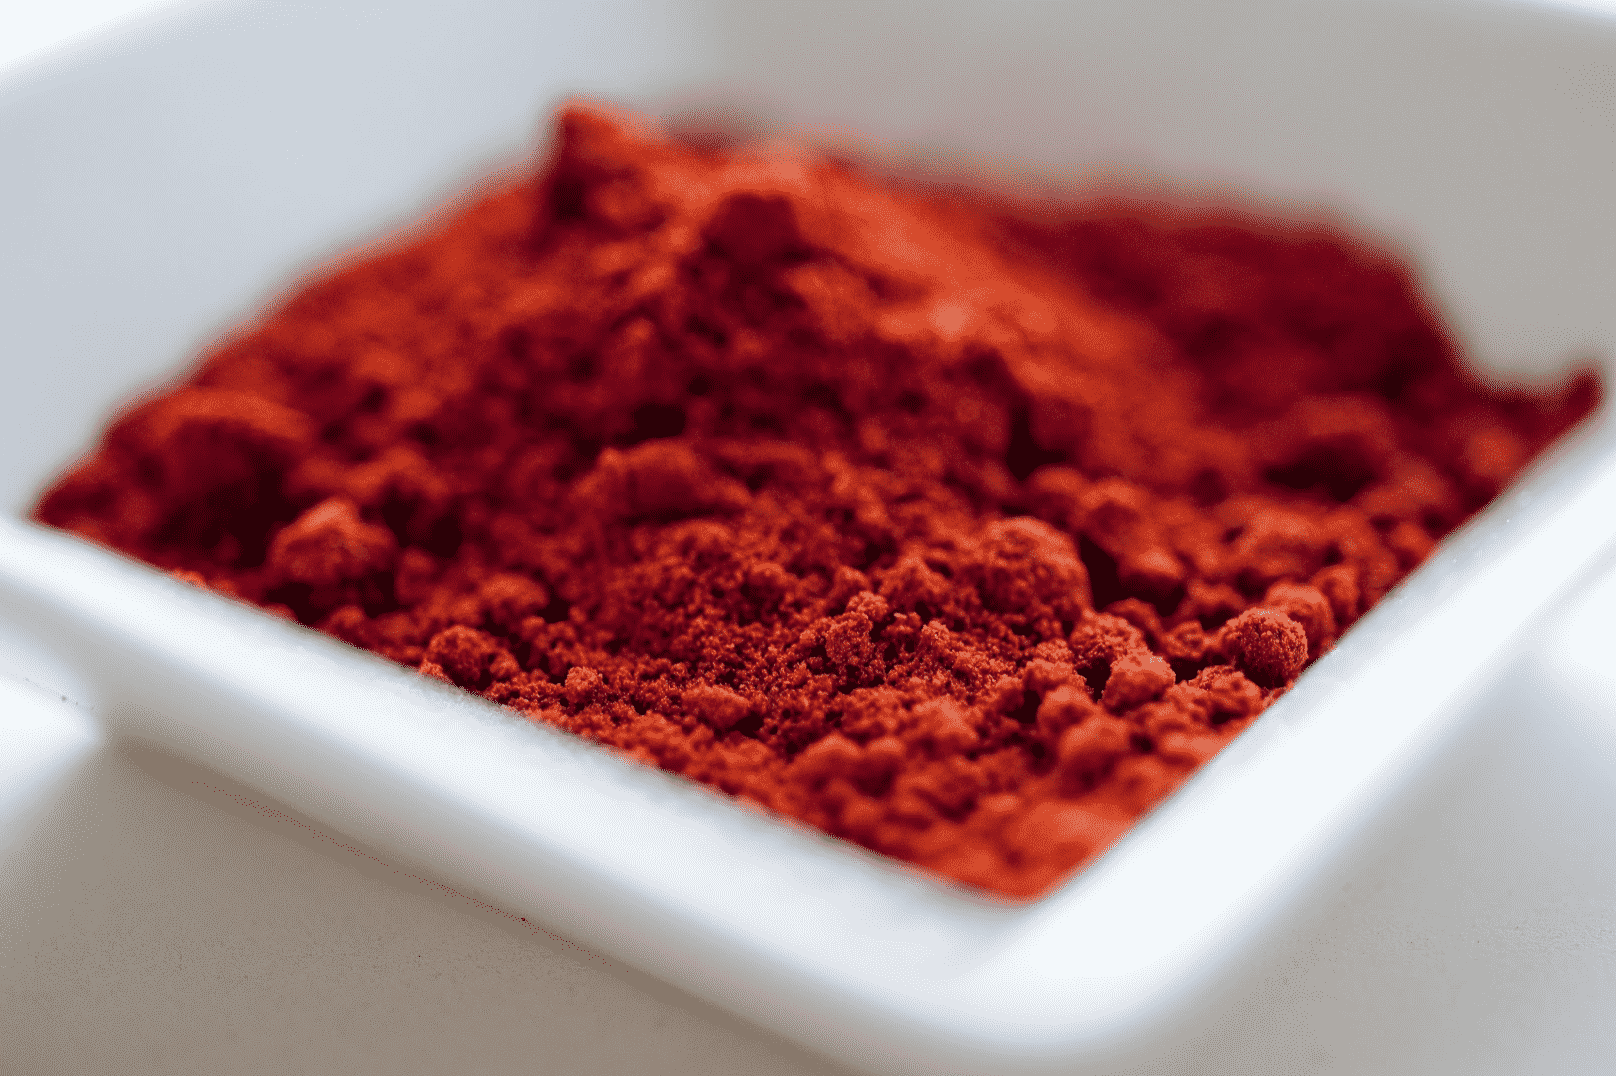 Paprika, Spanish Smoked - Spices used - Spice Station